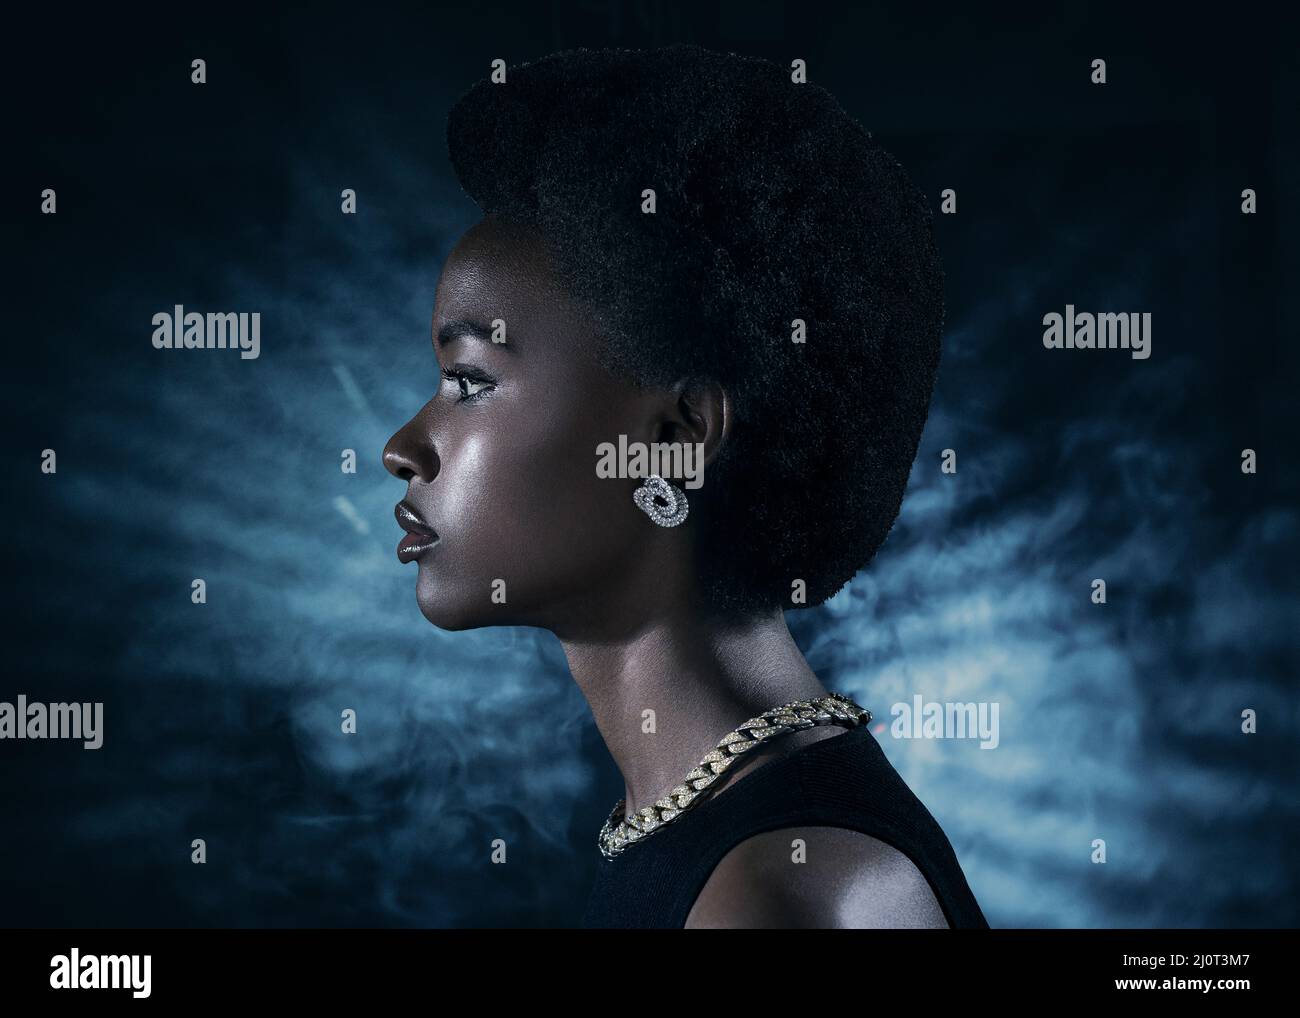 Young black woman profile beauty portrait on dark background Stock Photo